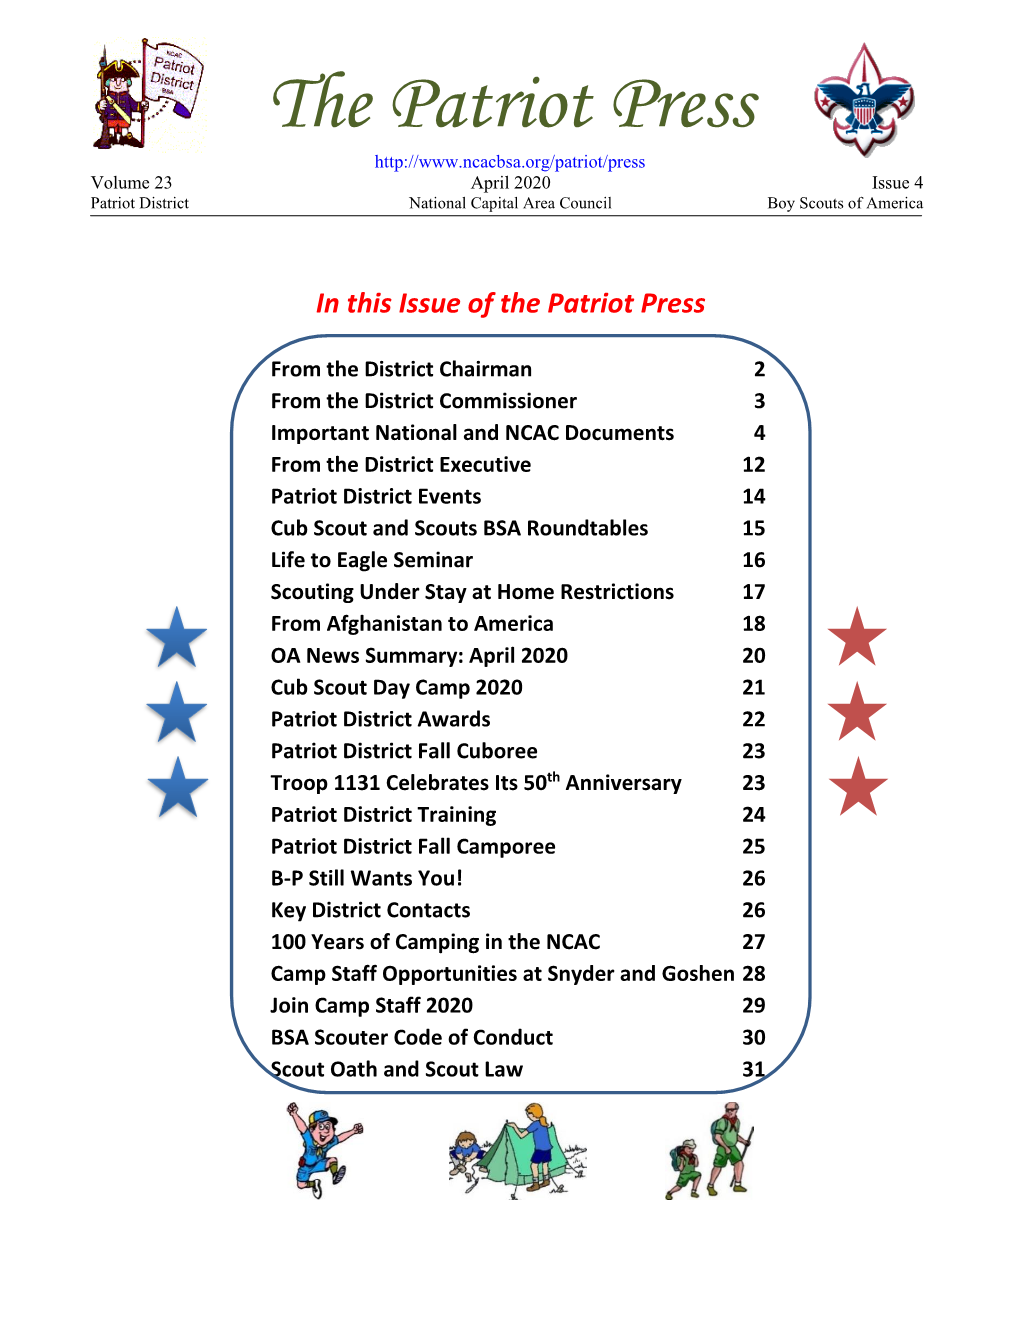 The Patriot Press Volume 23 April 2020 Issue 4 Patriot District National Capital Area Council Boy Scouts of America